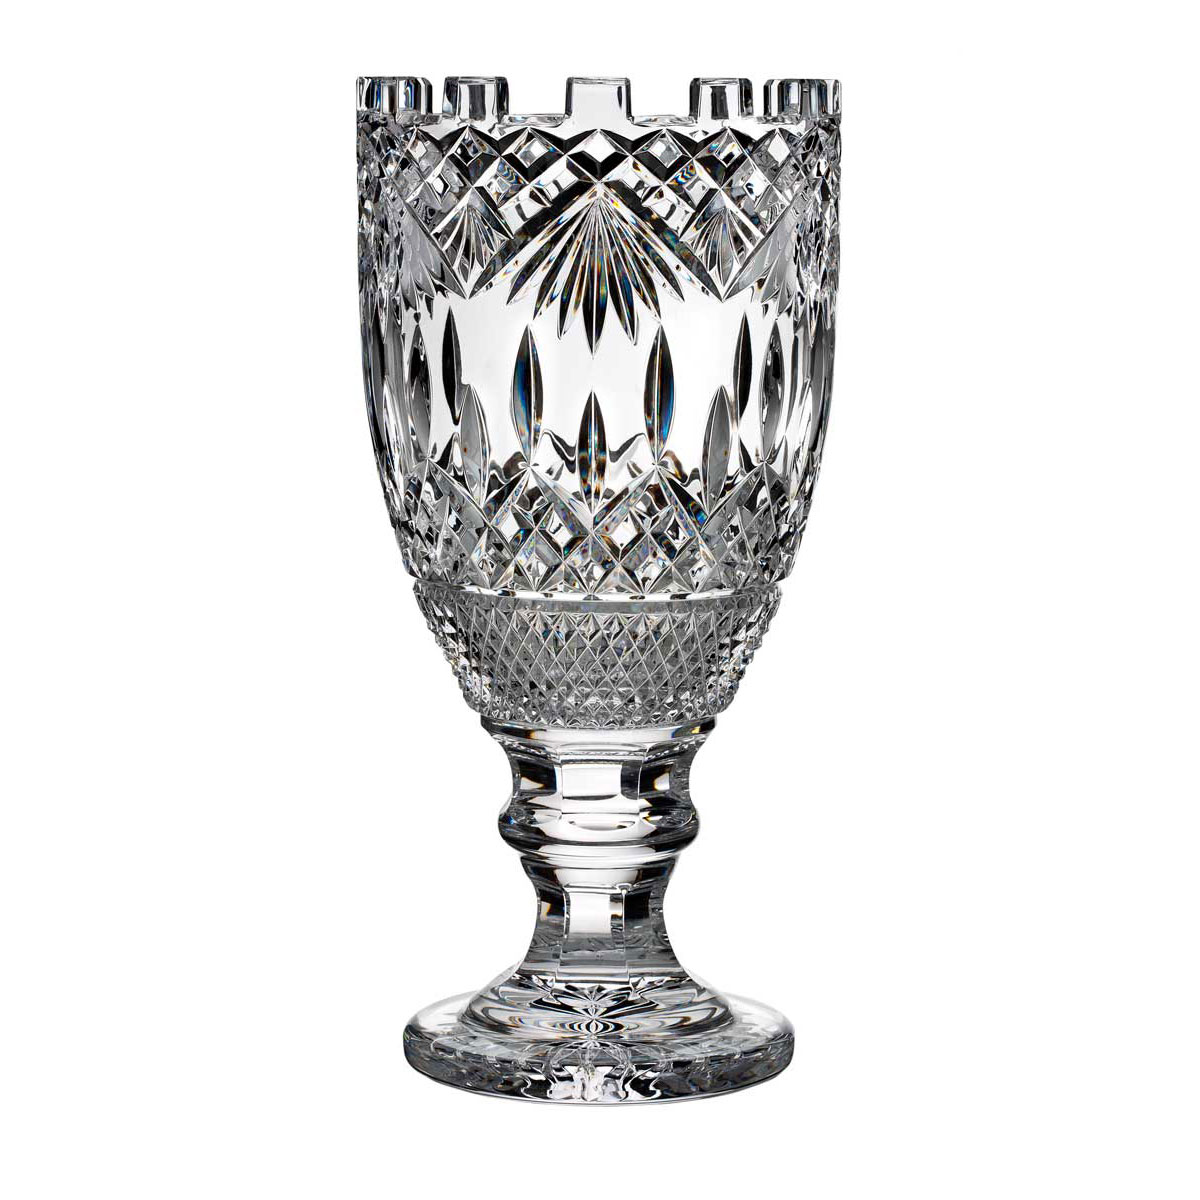 Waterford Crystal, House of Waterford Matt Kehoe Lismore Crystal Vase, Limited Edition of 250